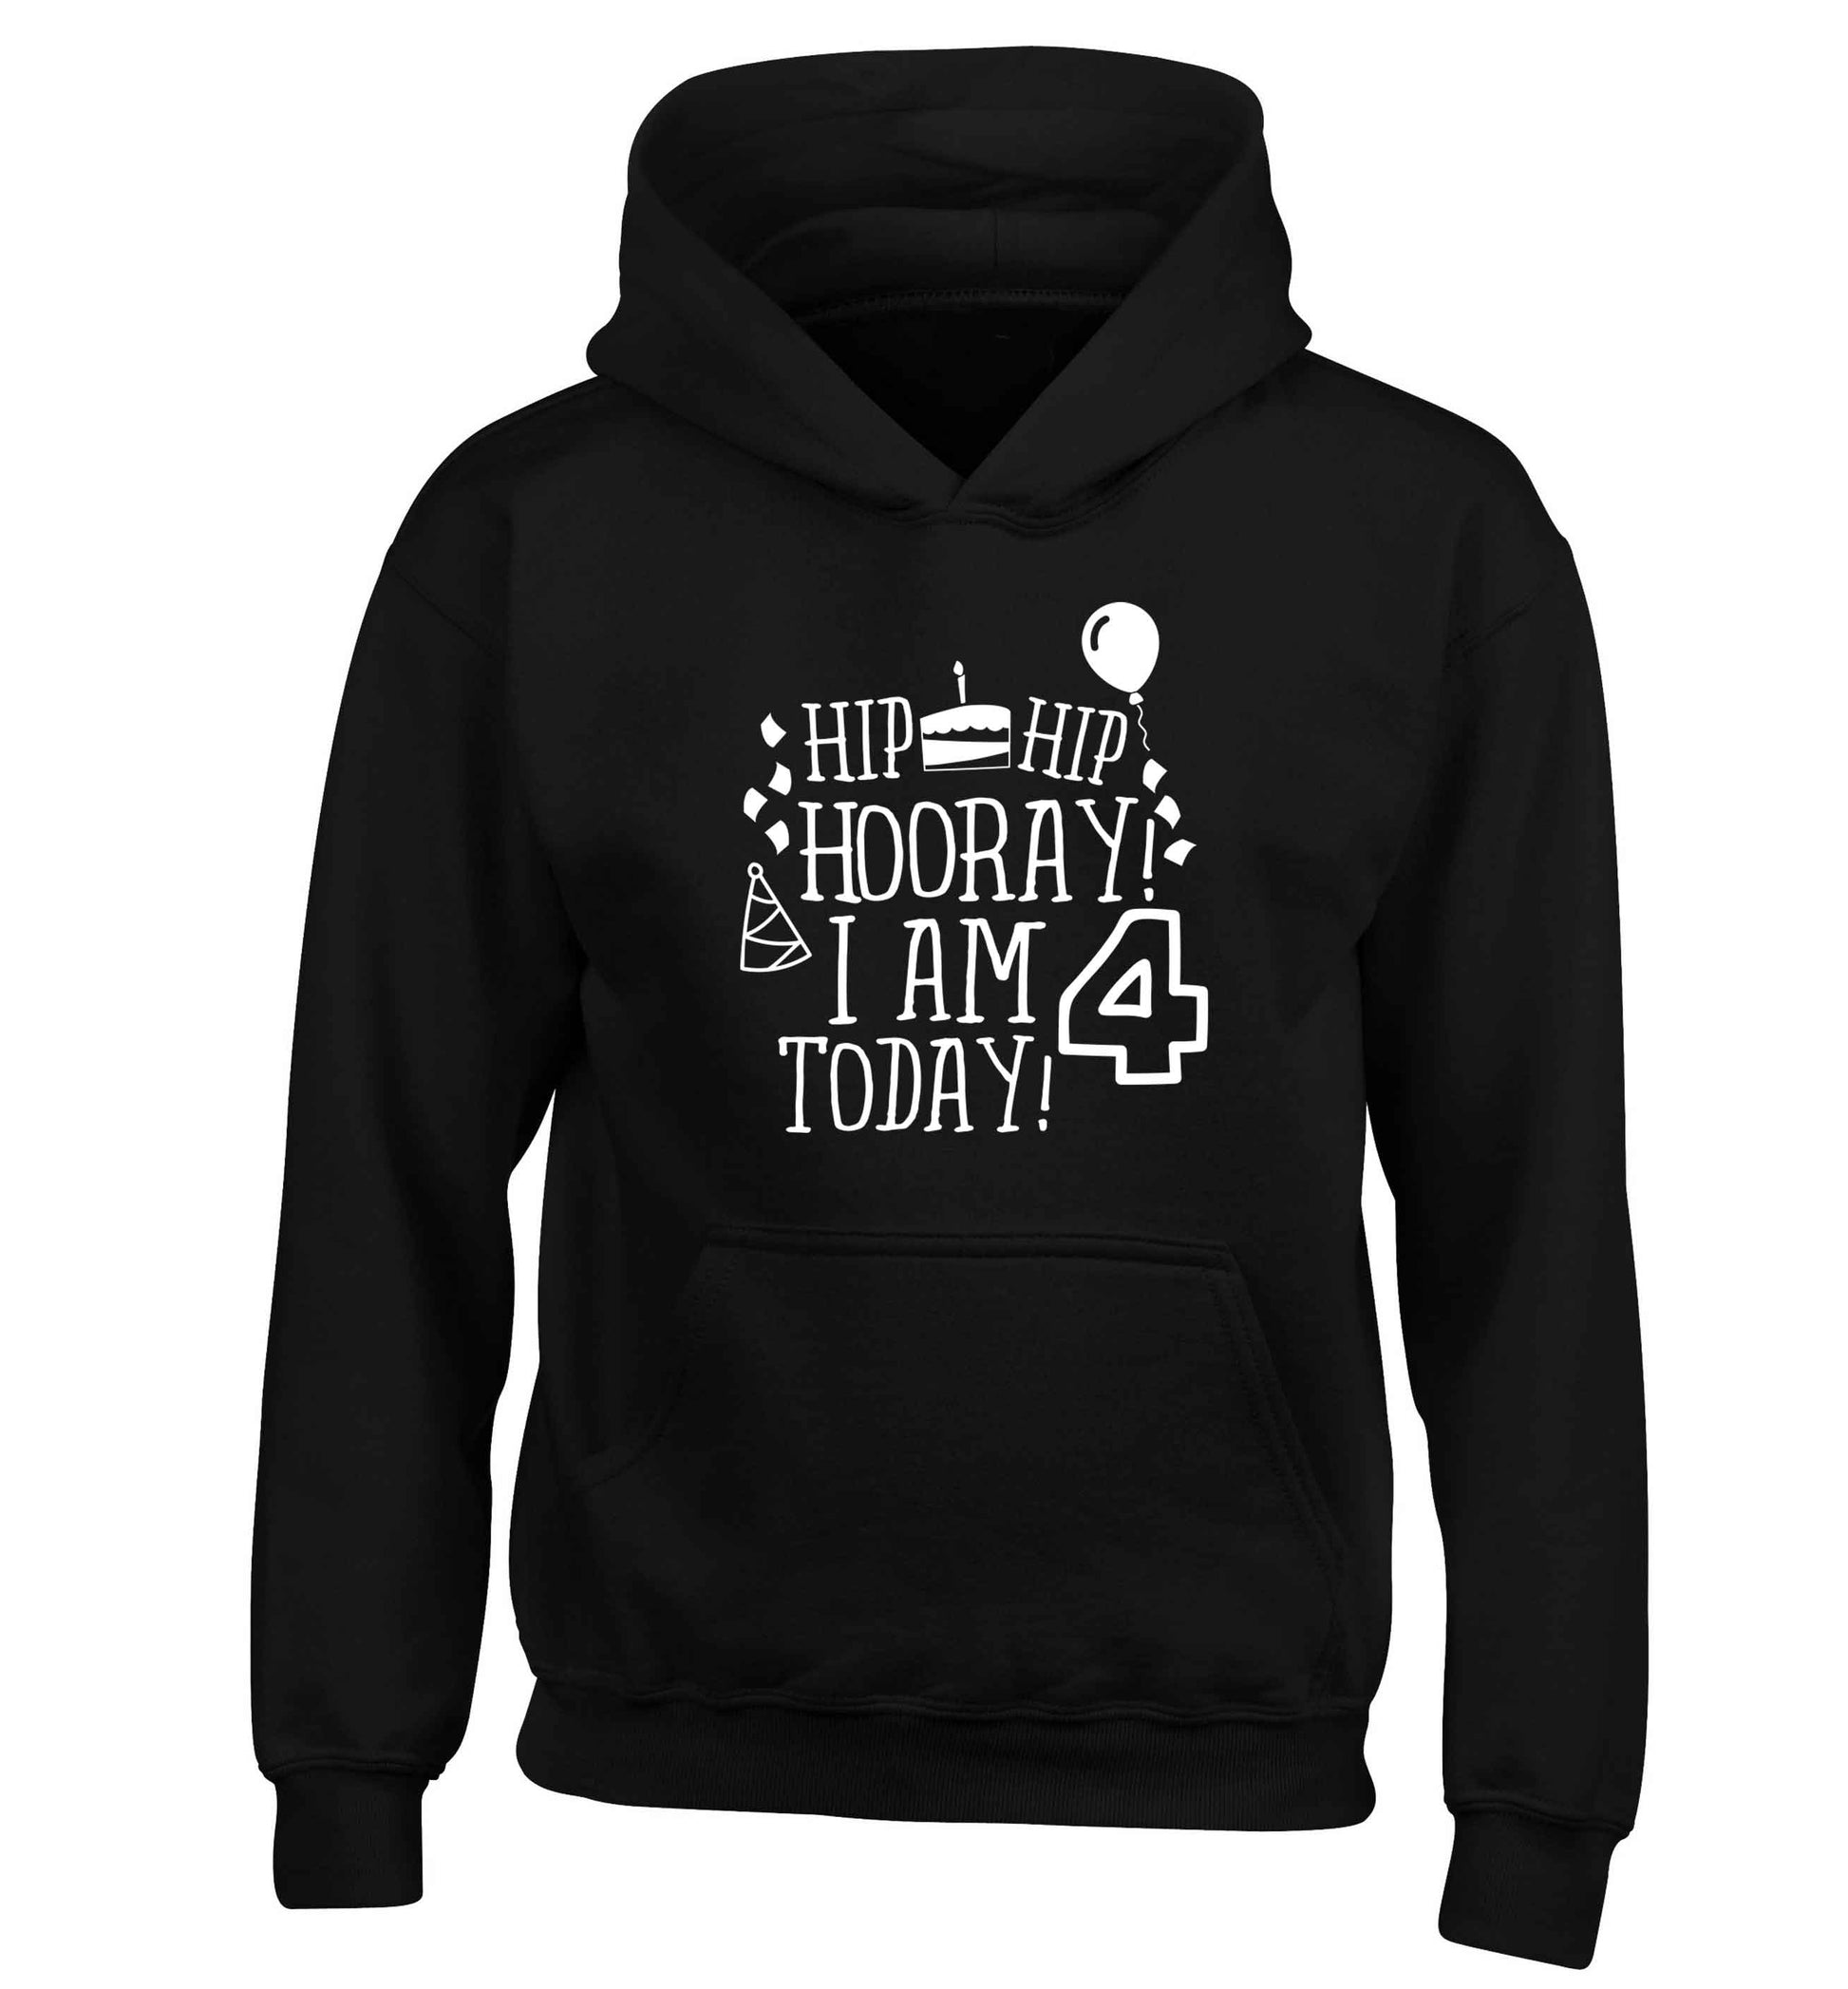 Hip hip hooray I am four today! children's black hoodie 12-13 Years